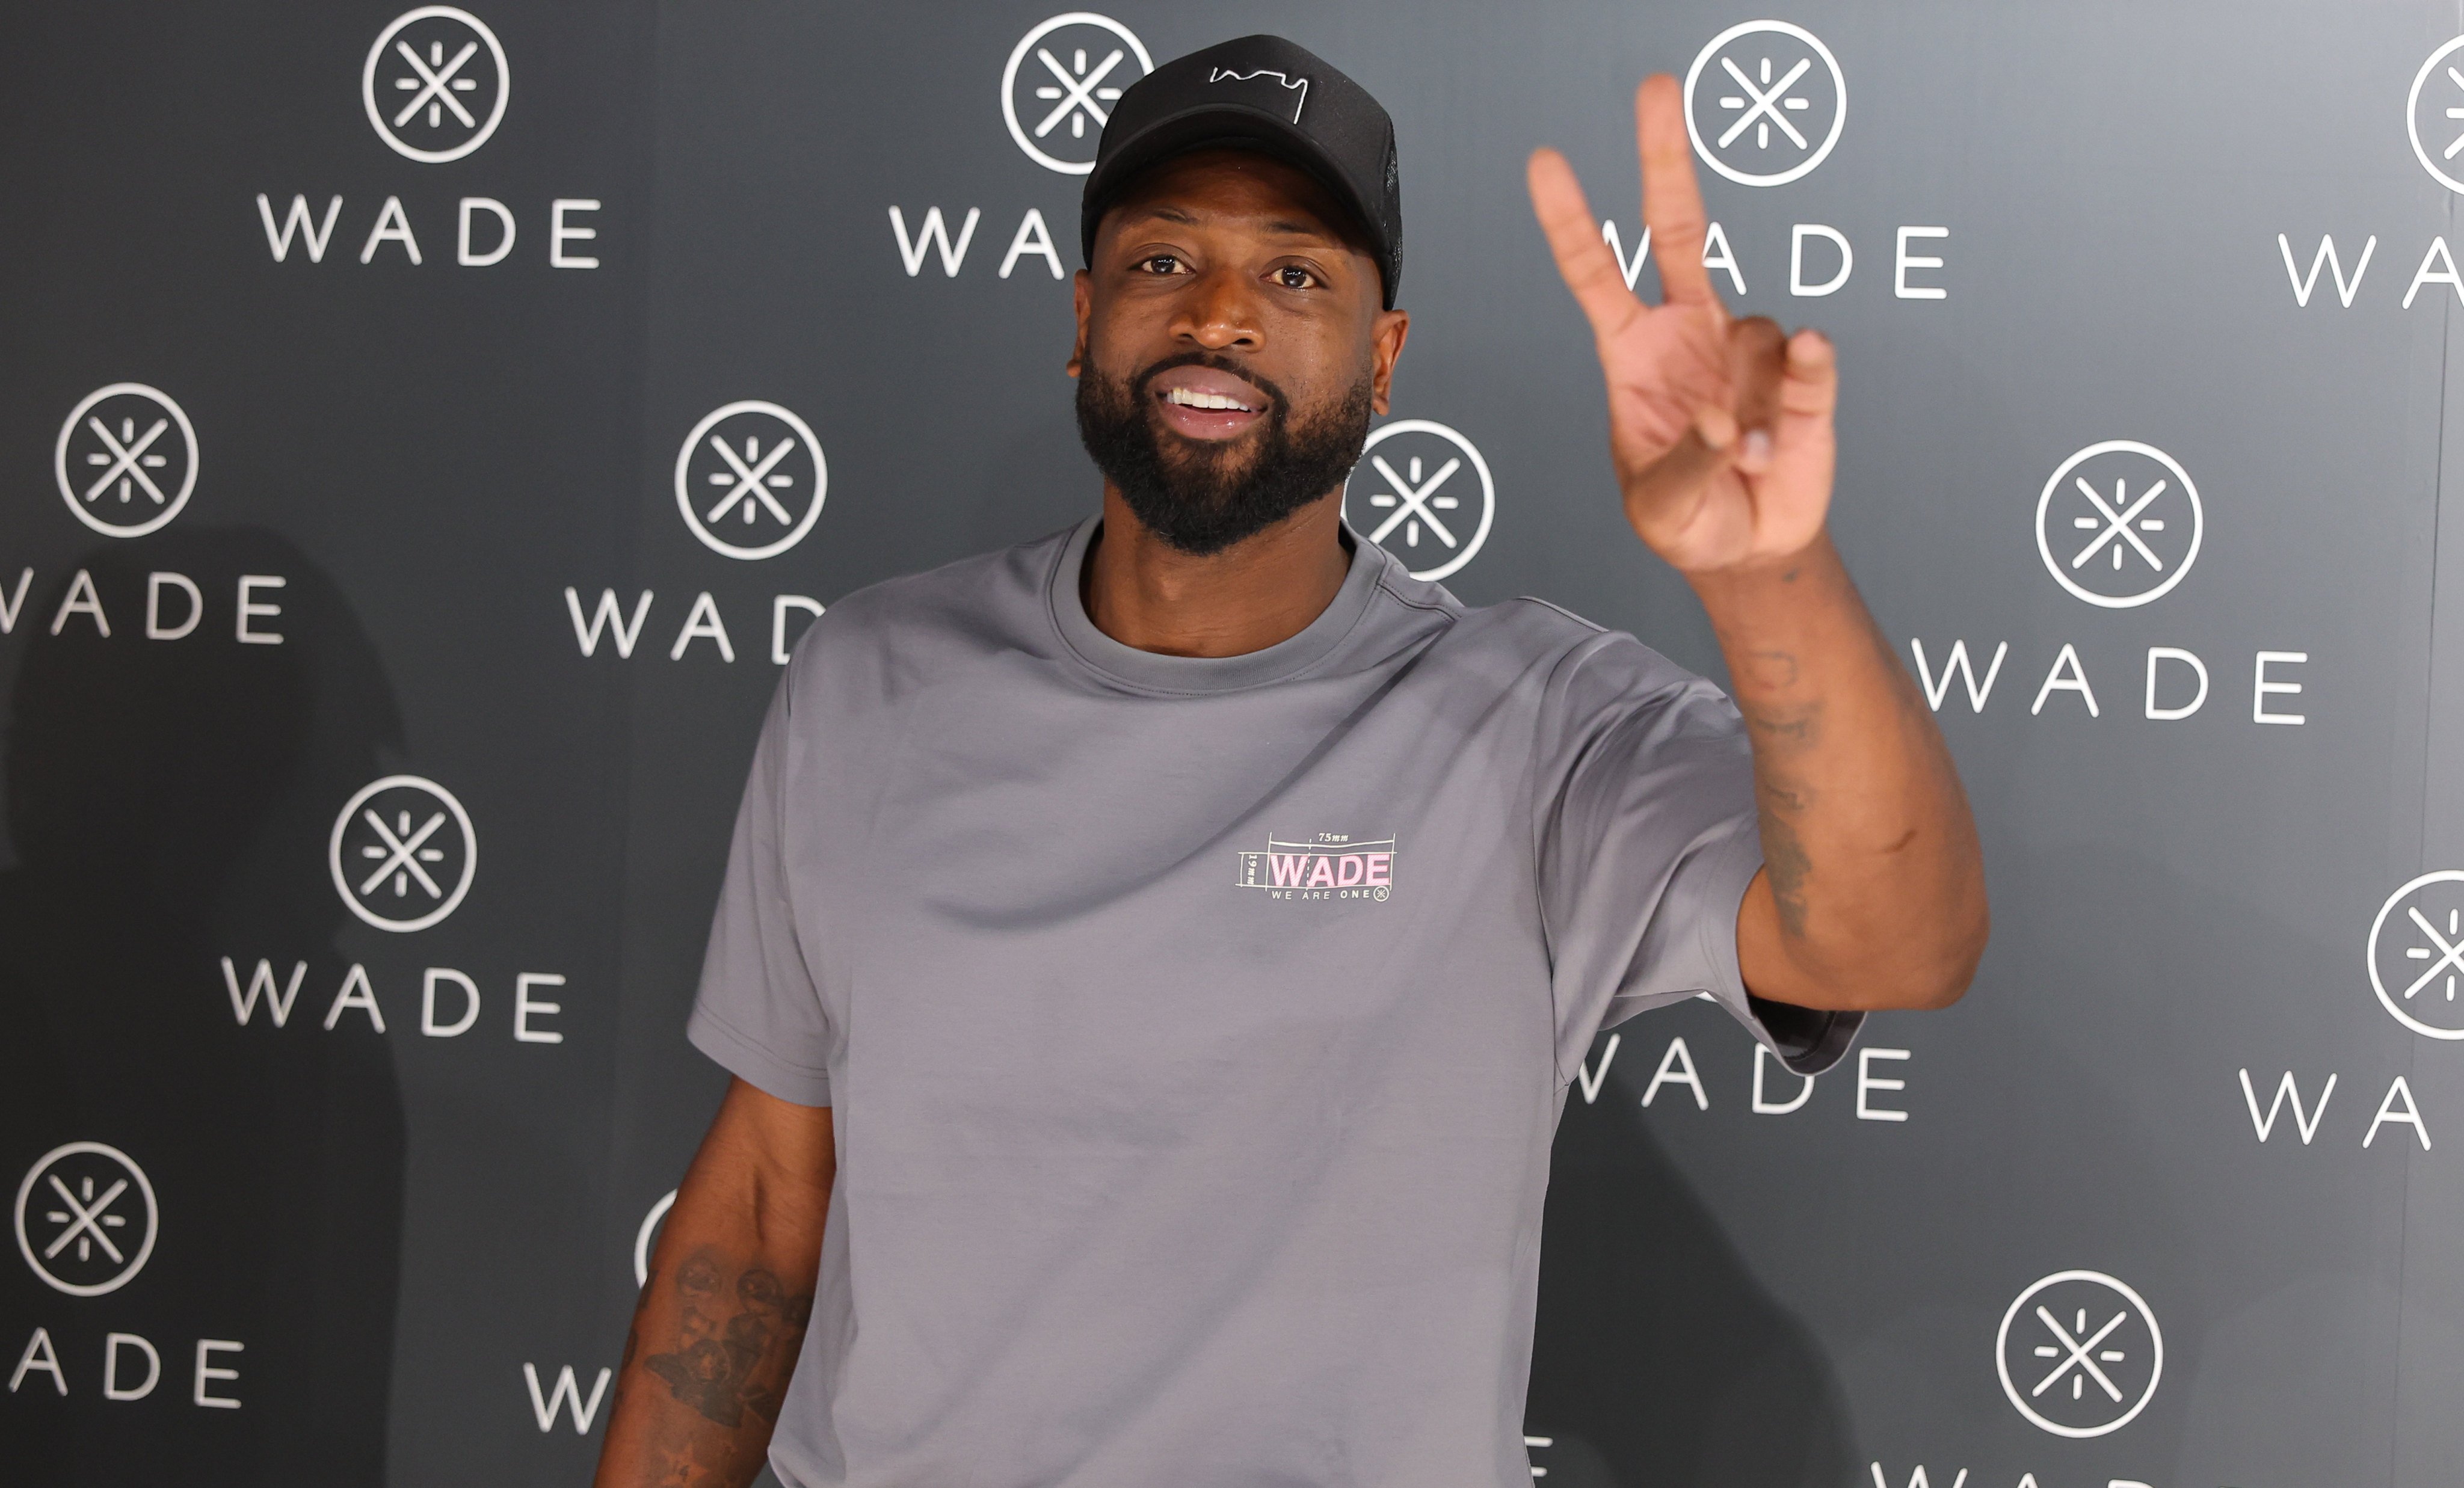 Ex-NBA basketball player Dwyane Wade during an appearance in Hong Kong on Monday. Photo: Edmond So